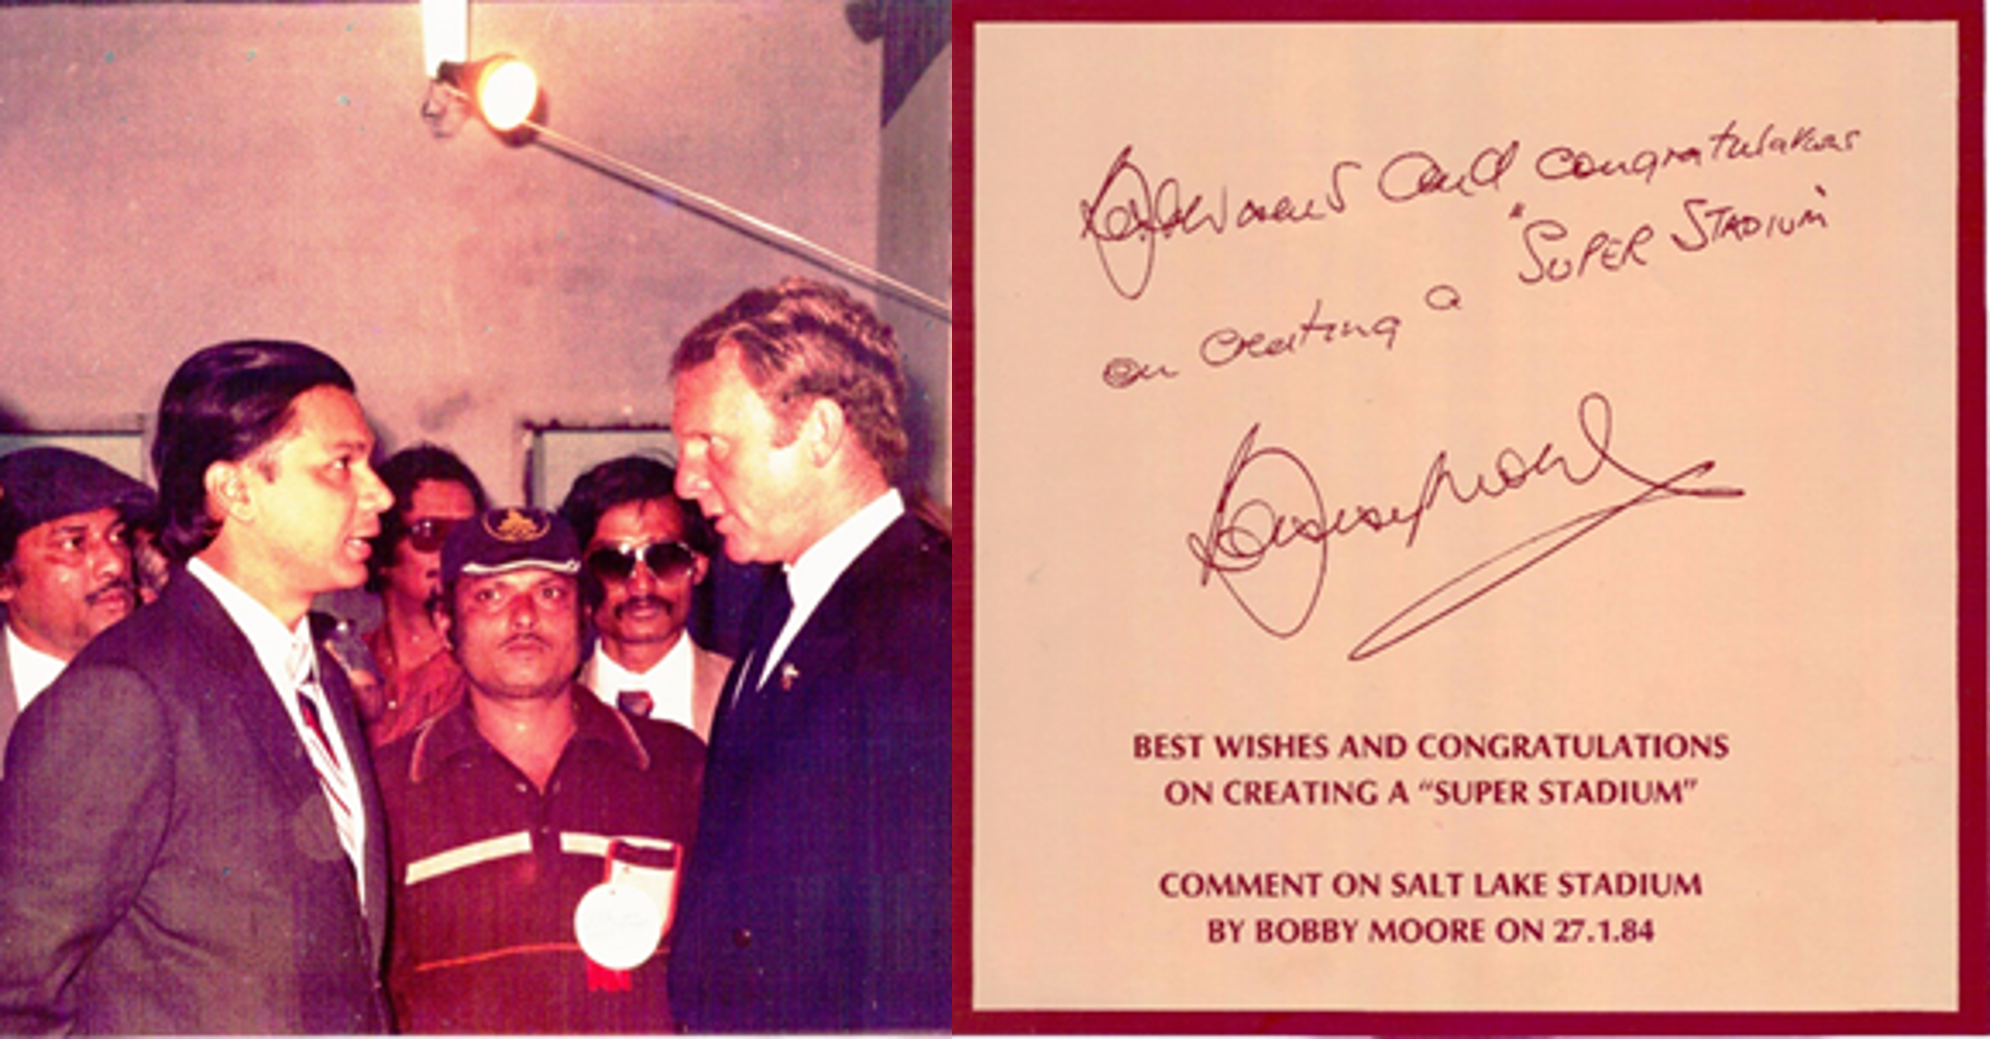 A college of two photos. Left Hirak Sen meeting Bobby Moore, they are both wearing suits. Right: a signed note of congratulations from Bobby regarding the stadium